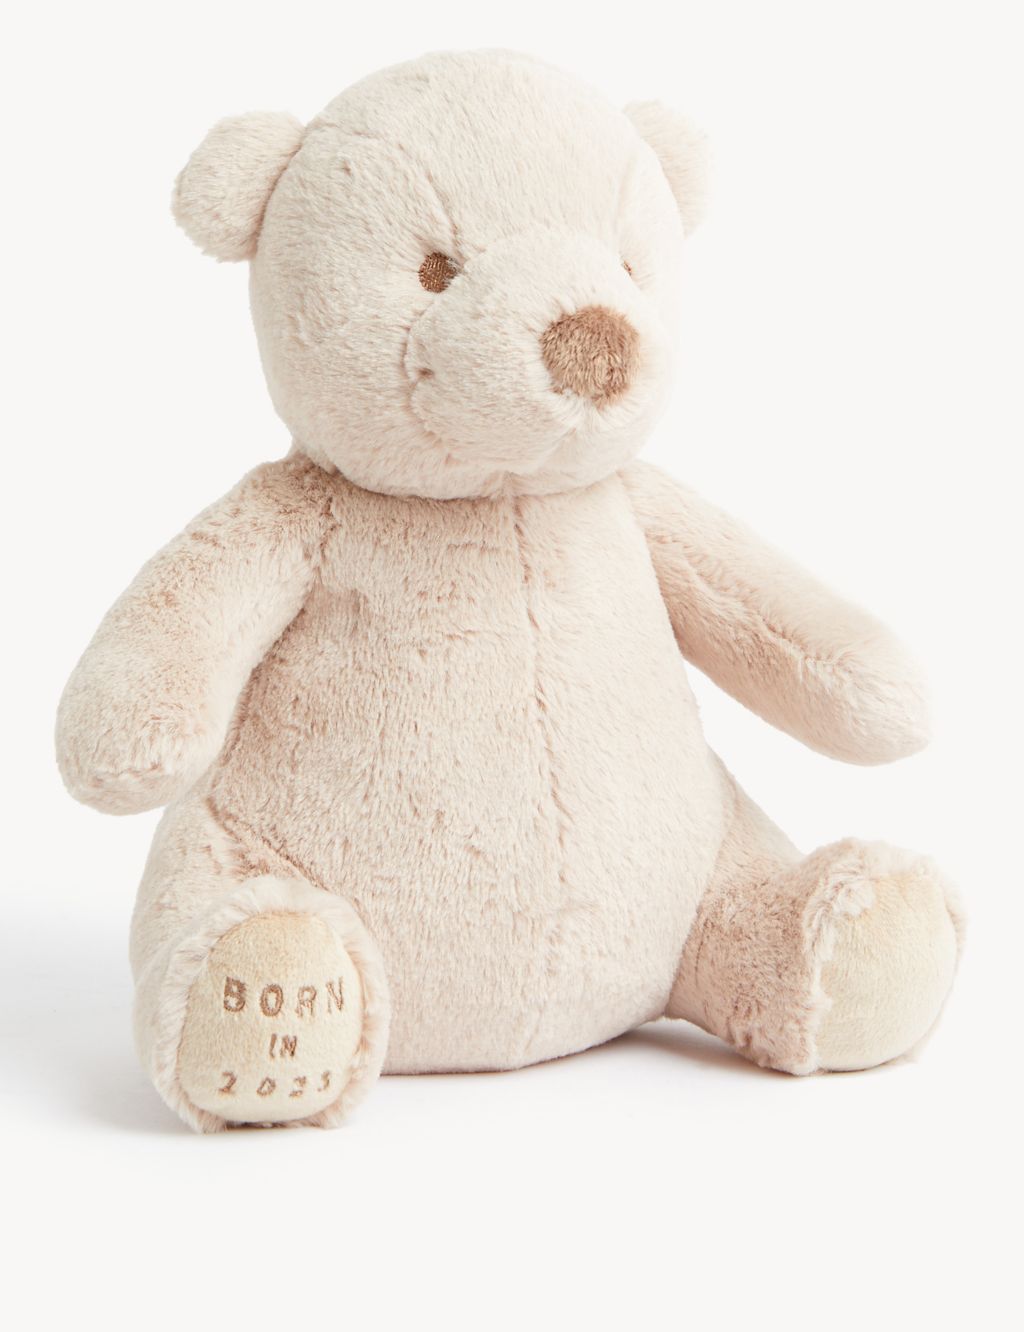 Born In 2023 Bear Soft Toy image 1